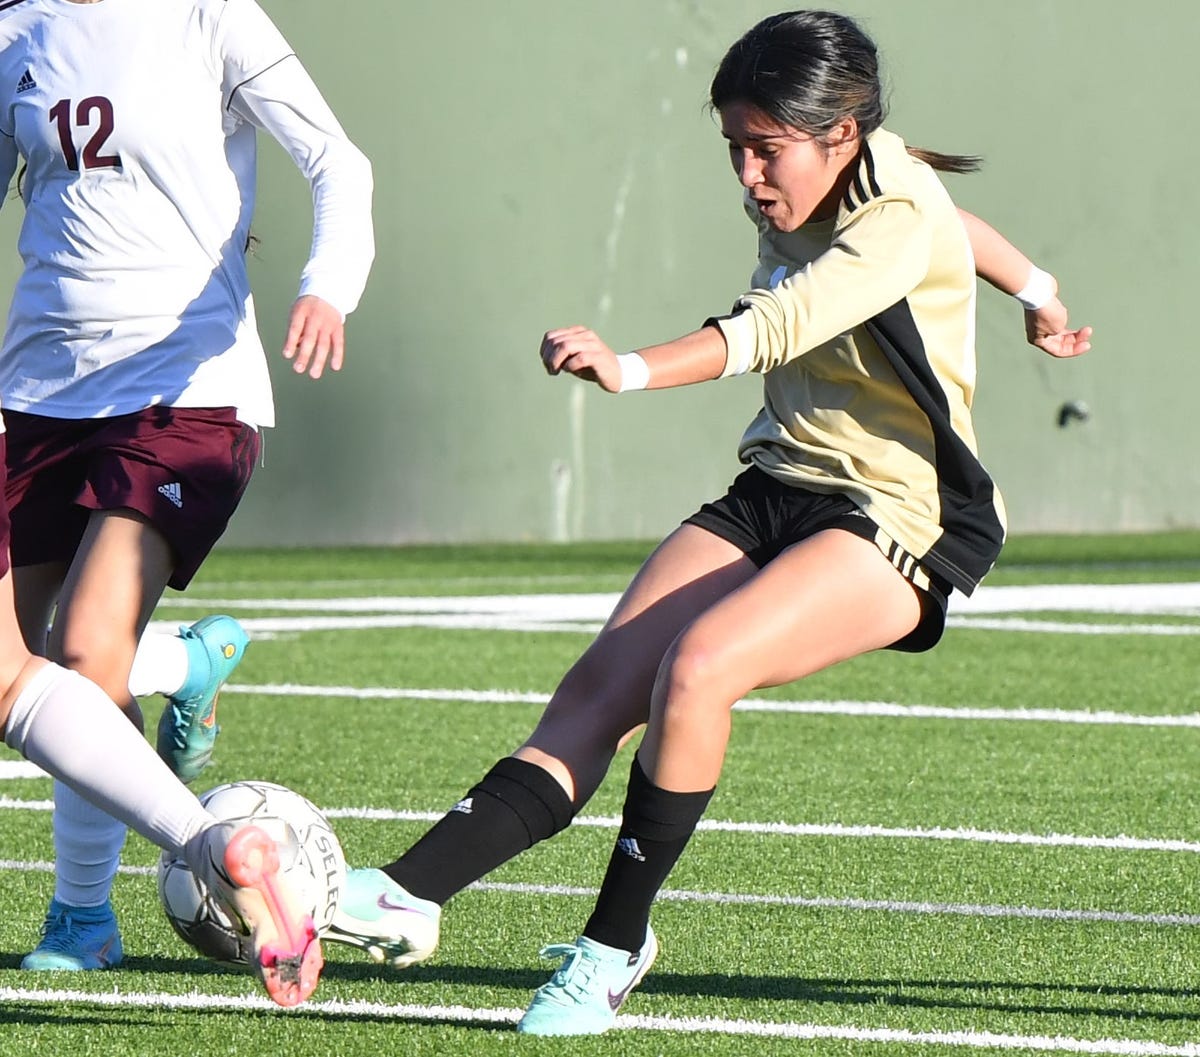 Soccer News: Lady Raiders & Lady Coyotes Dominate, Advance to Region Quarters